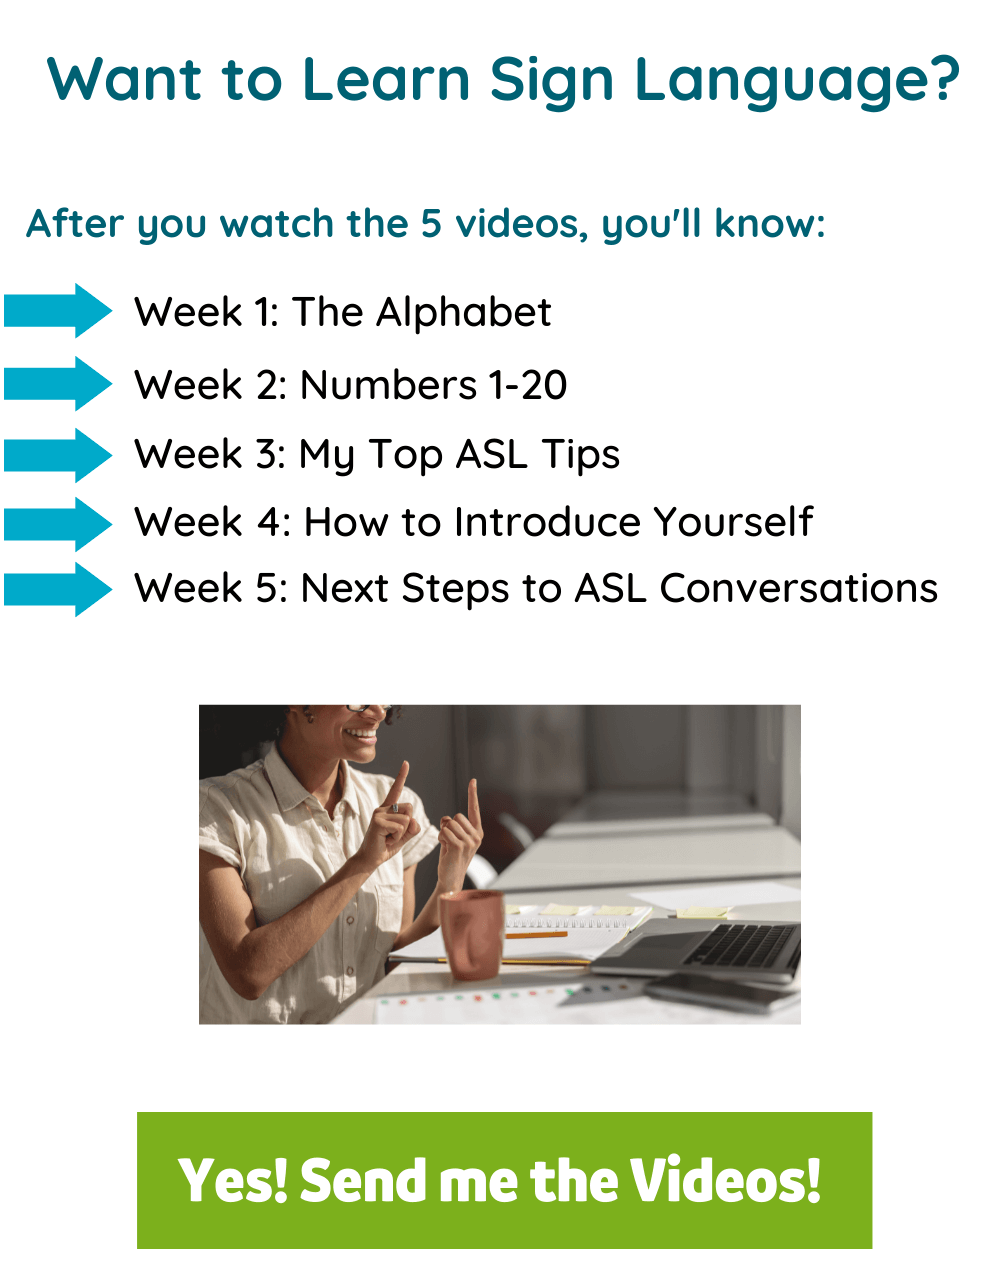 list of what to expect learning asl in 5 weeks class